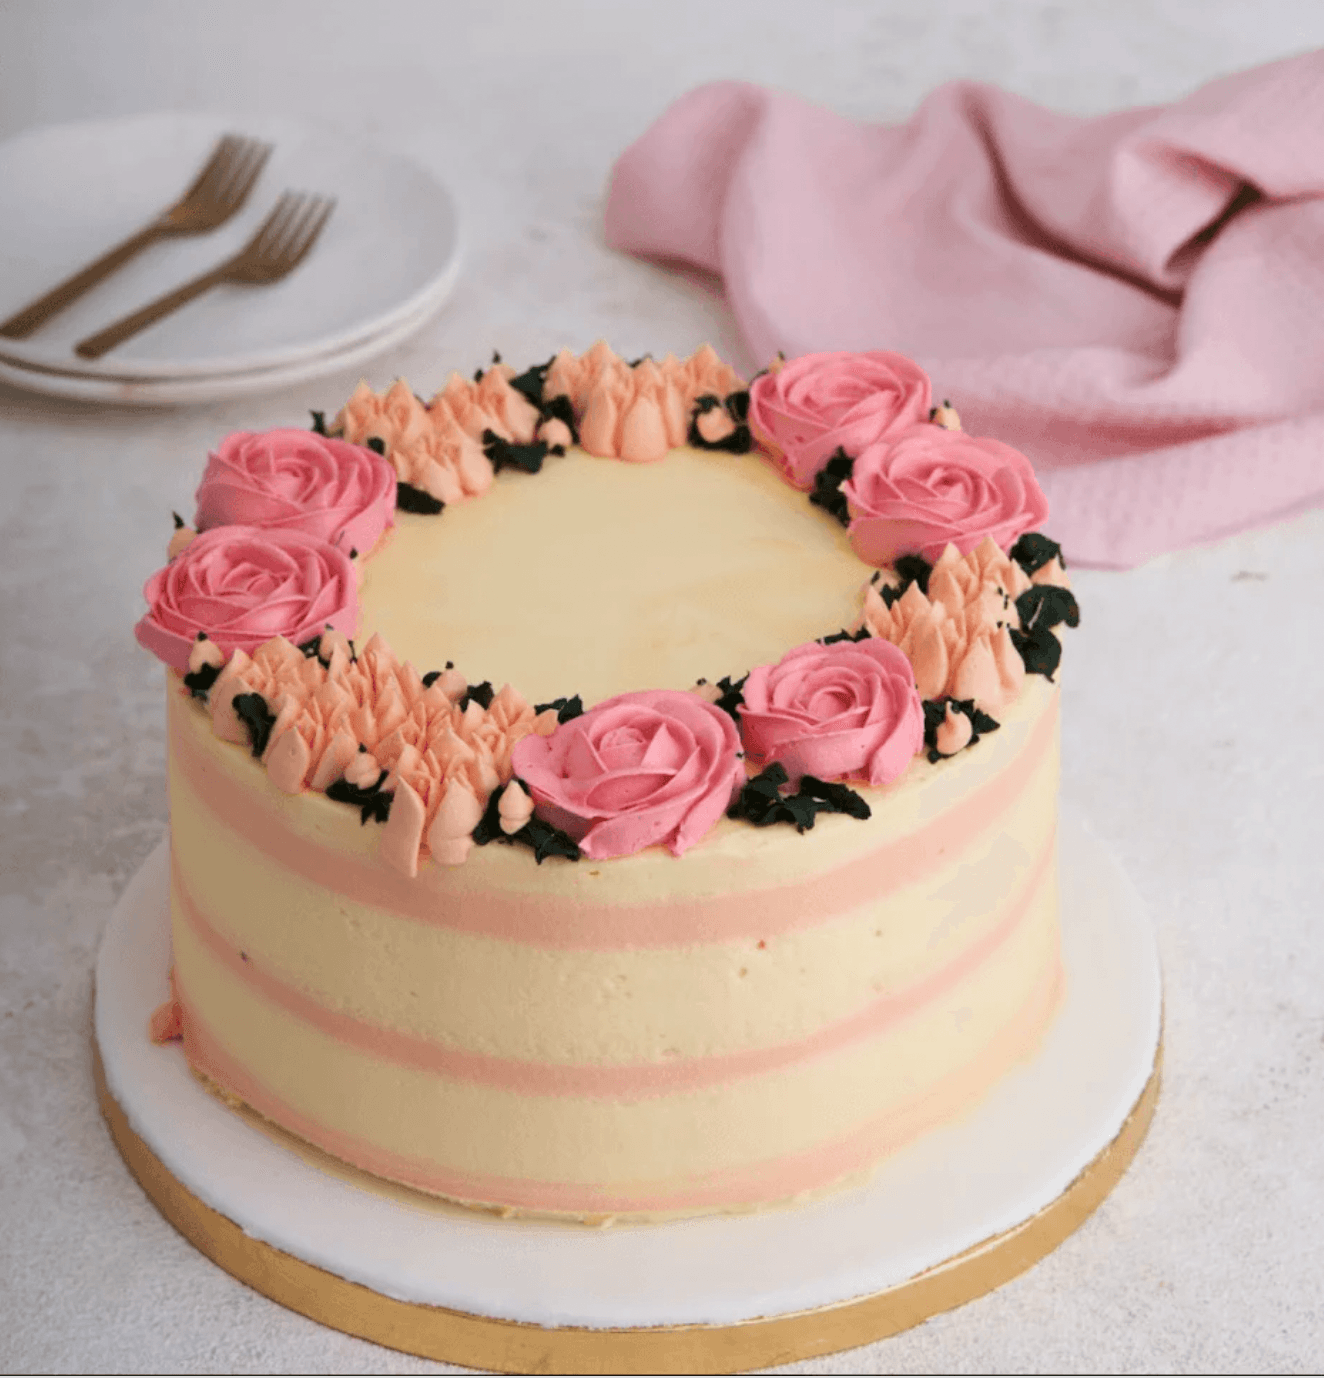 Lunch & Learn – Cake Decorating (Bilingual!) | The Carroll and Madison  Library System